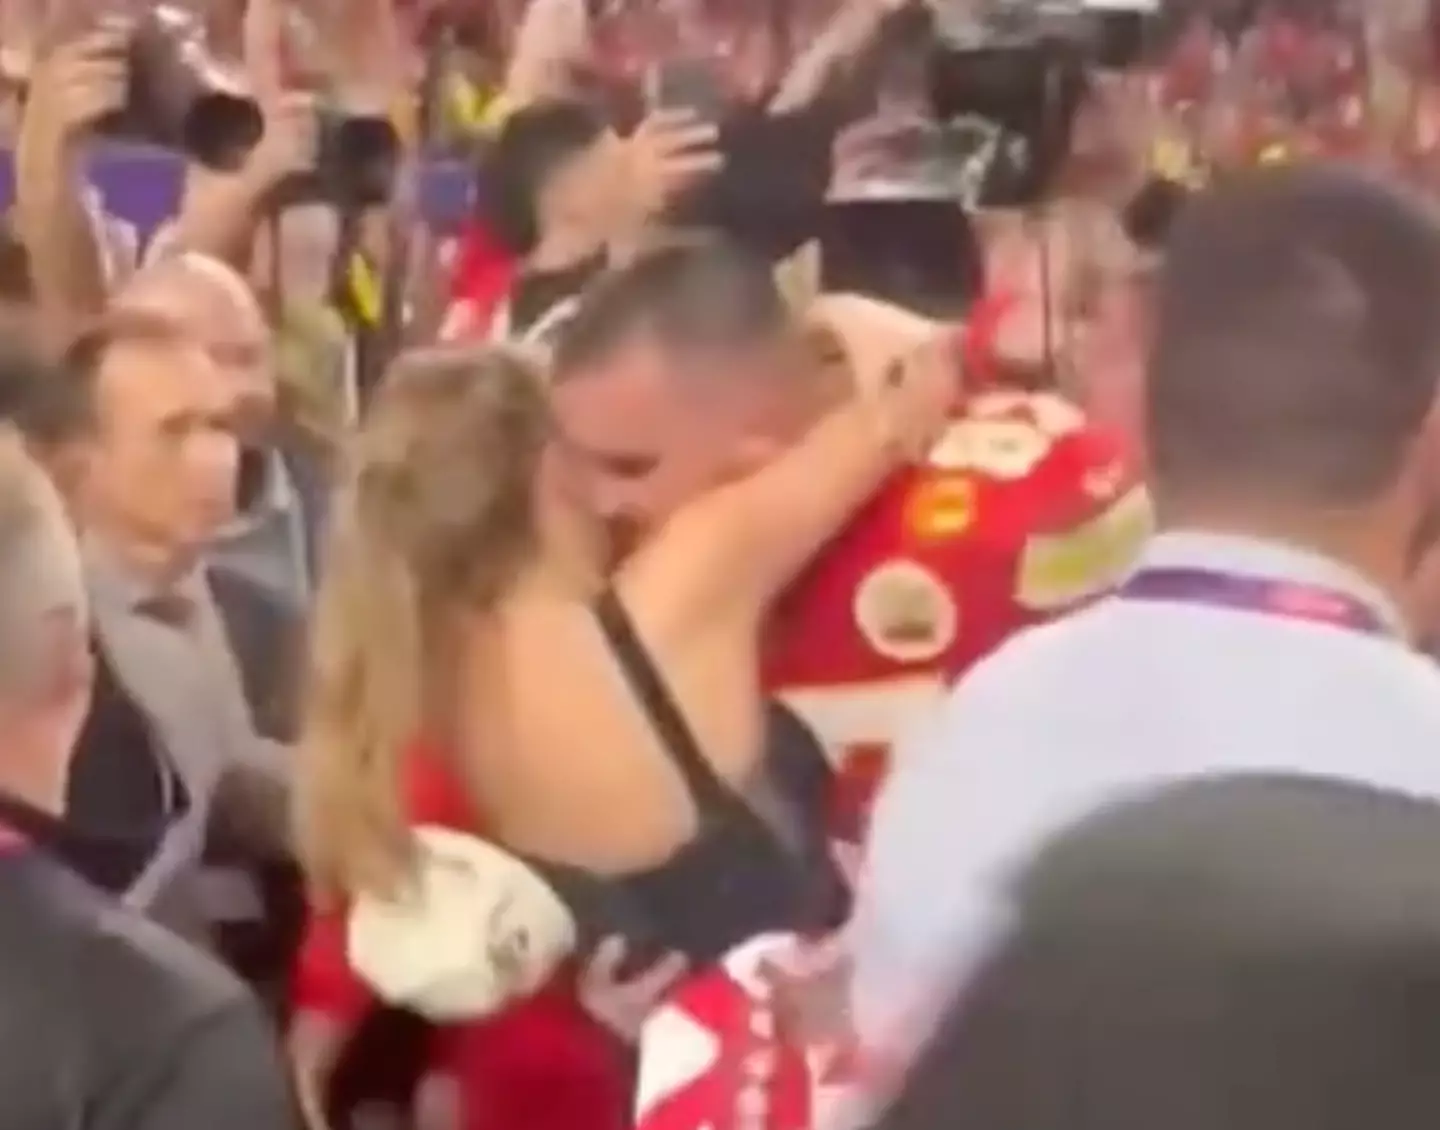 Taylor Swift has supported Kelce at multiple games.